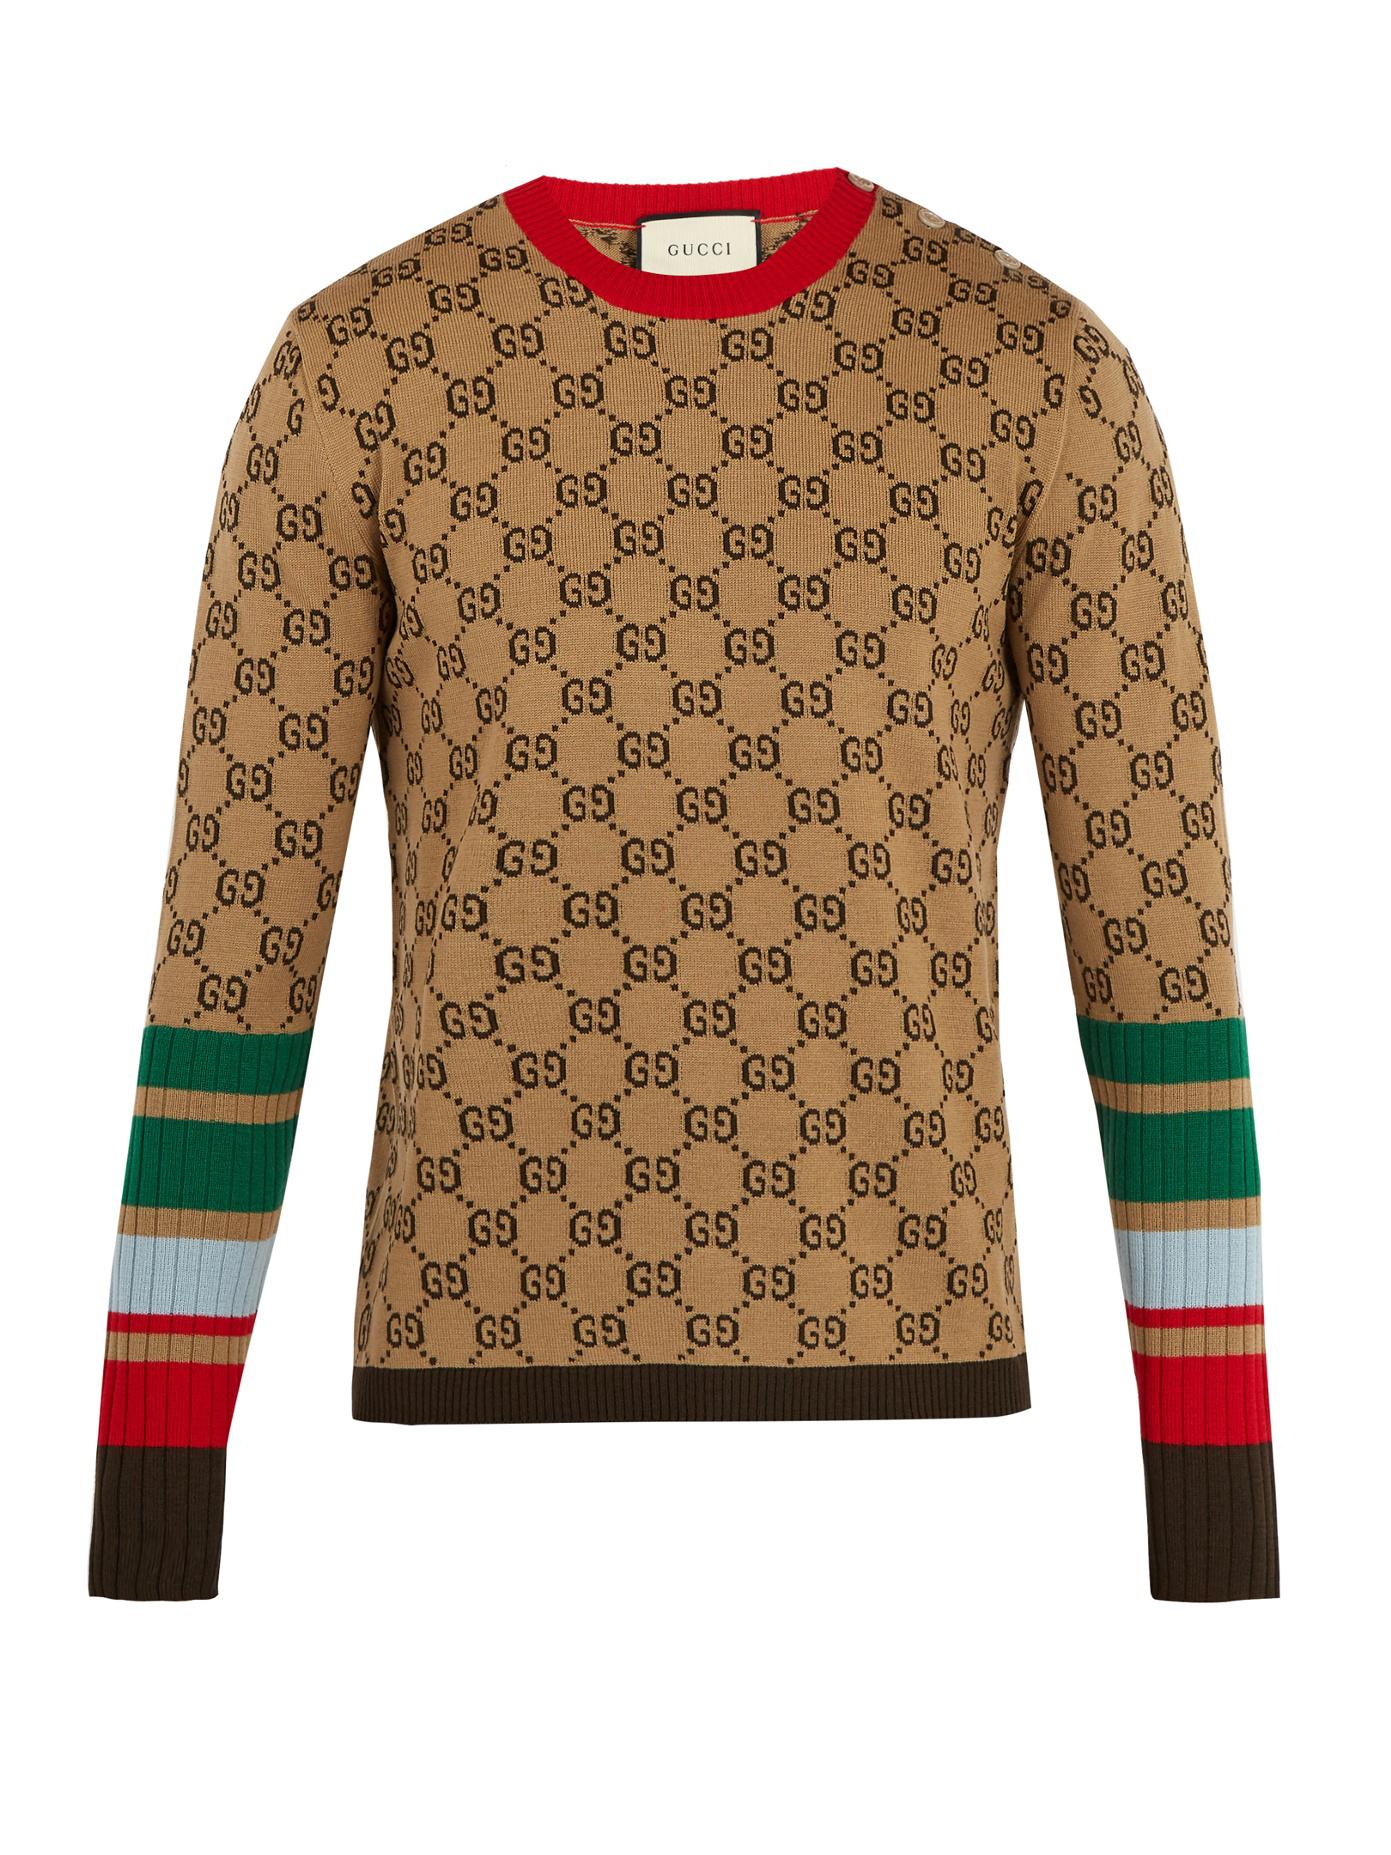 Gucci Gg-jacquard Crew-neck Wool Sweater in Natural for Men - Lyst